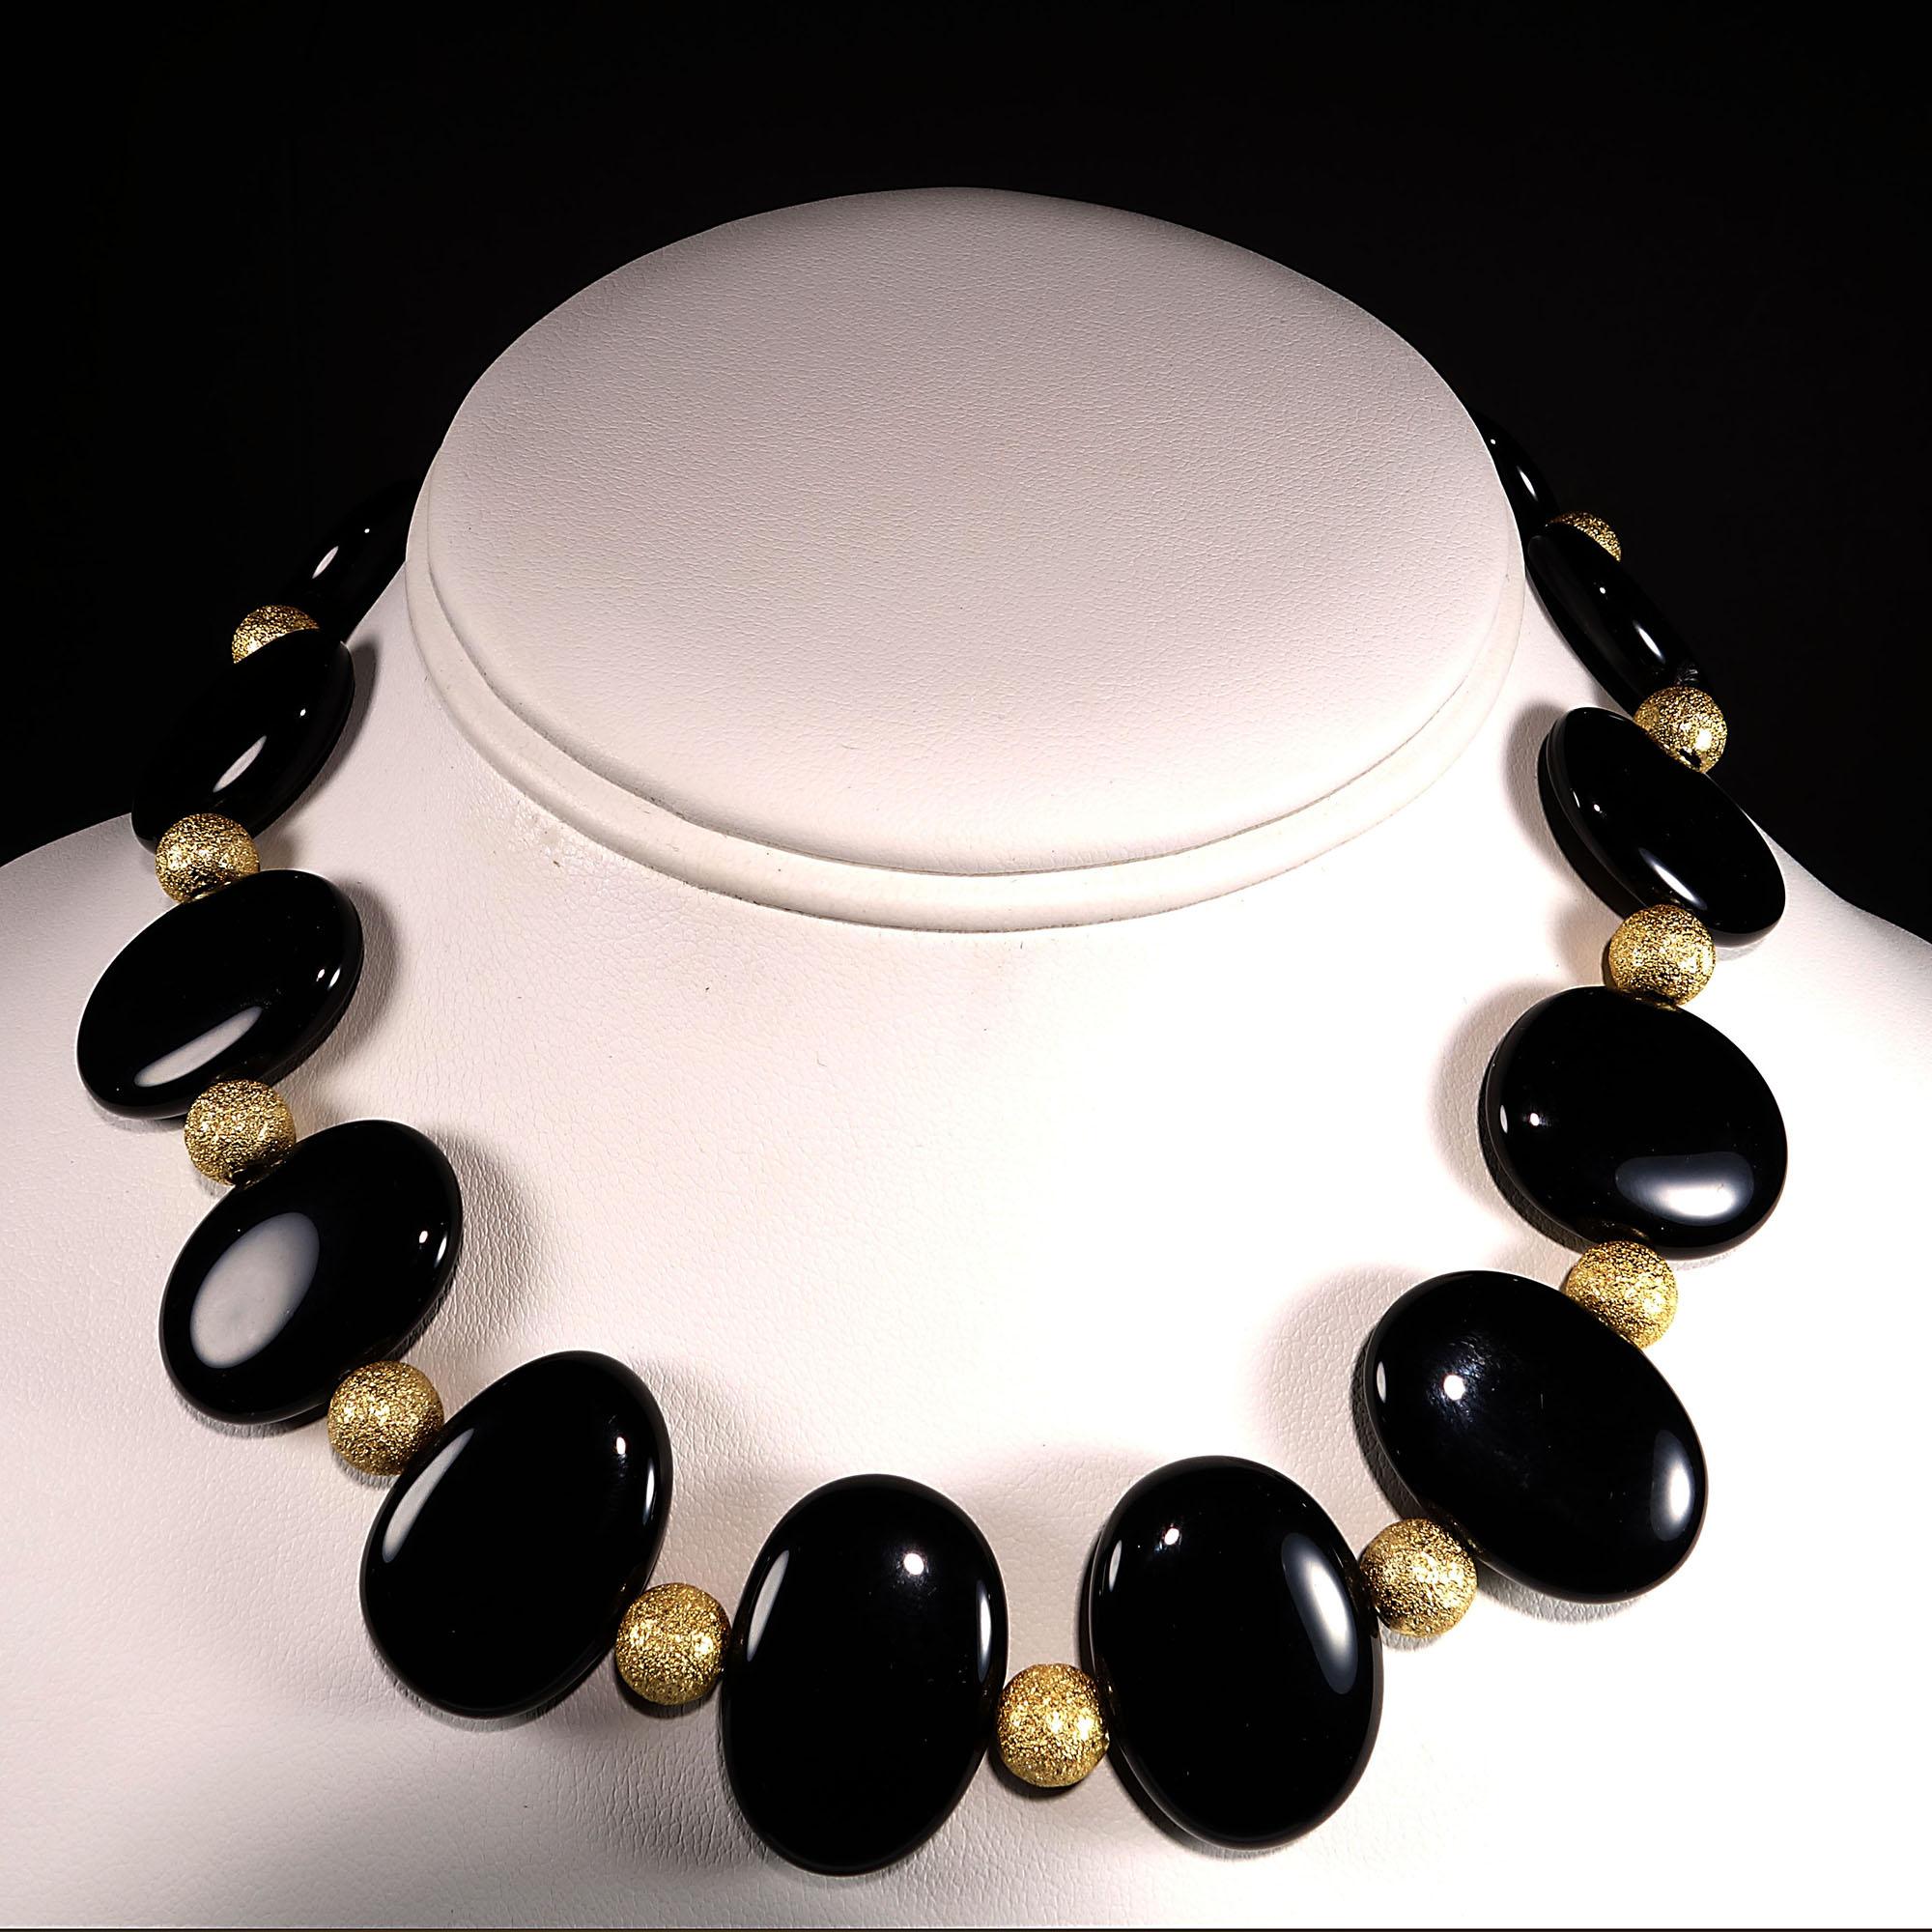 Unique choker necklace of oval Black Onyx tablets with frosted gold accents. This handmade choker necklace is 14.5 inches in length, just right to sit at the base of your neck.  The highly polished oval Black Onyx tablets are approximately 24x16mm.